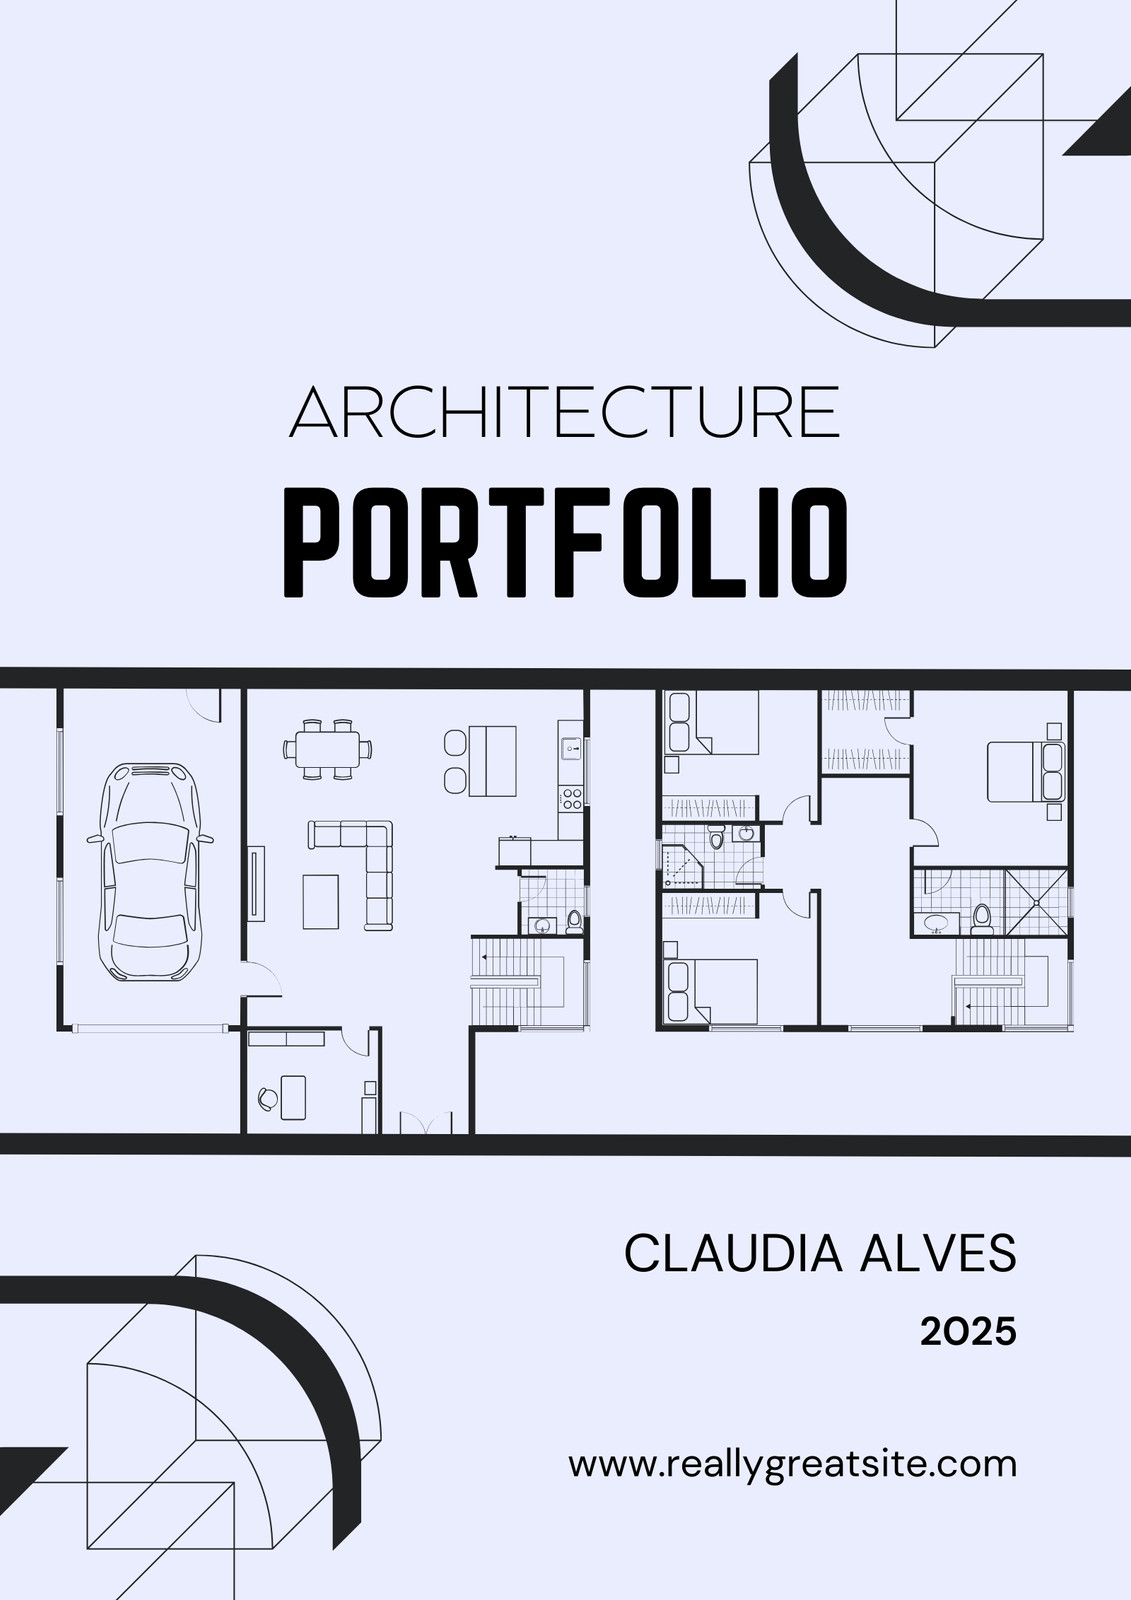 Free and customizable architecture templates